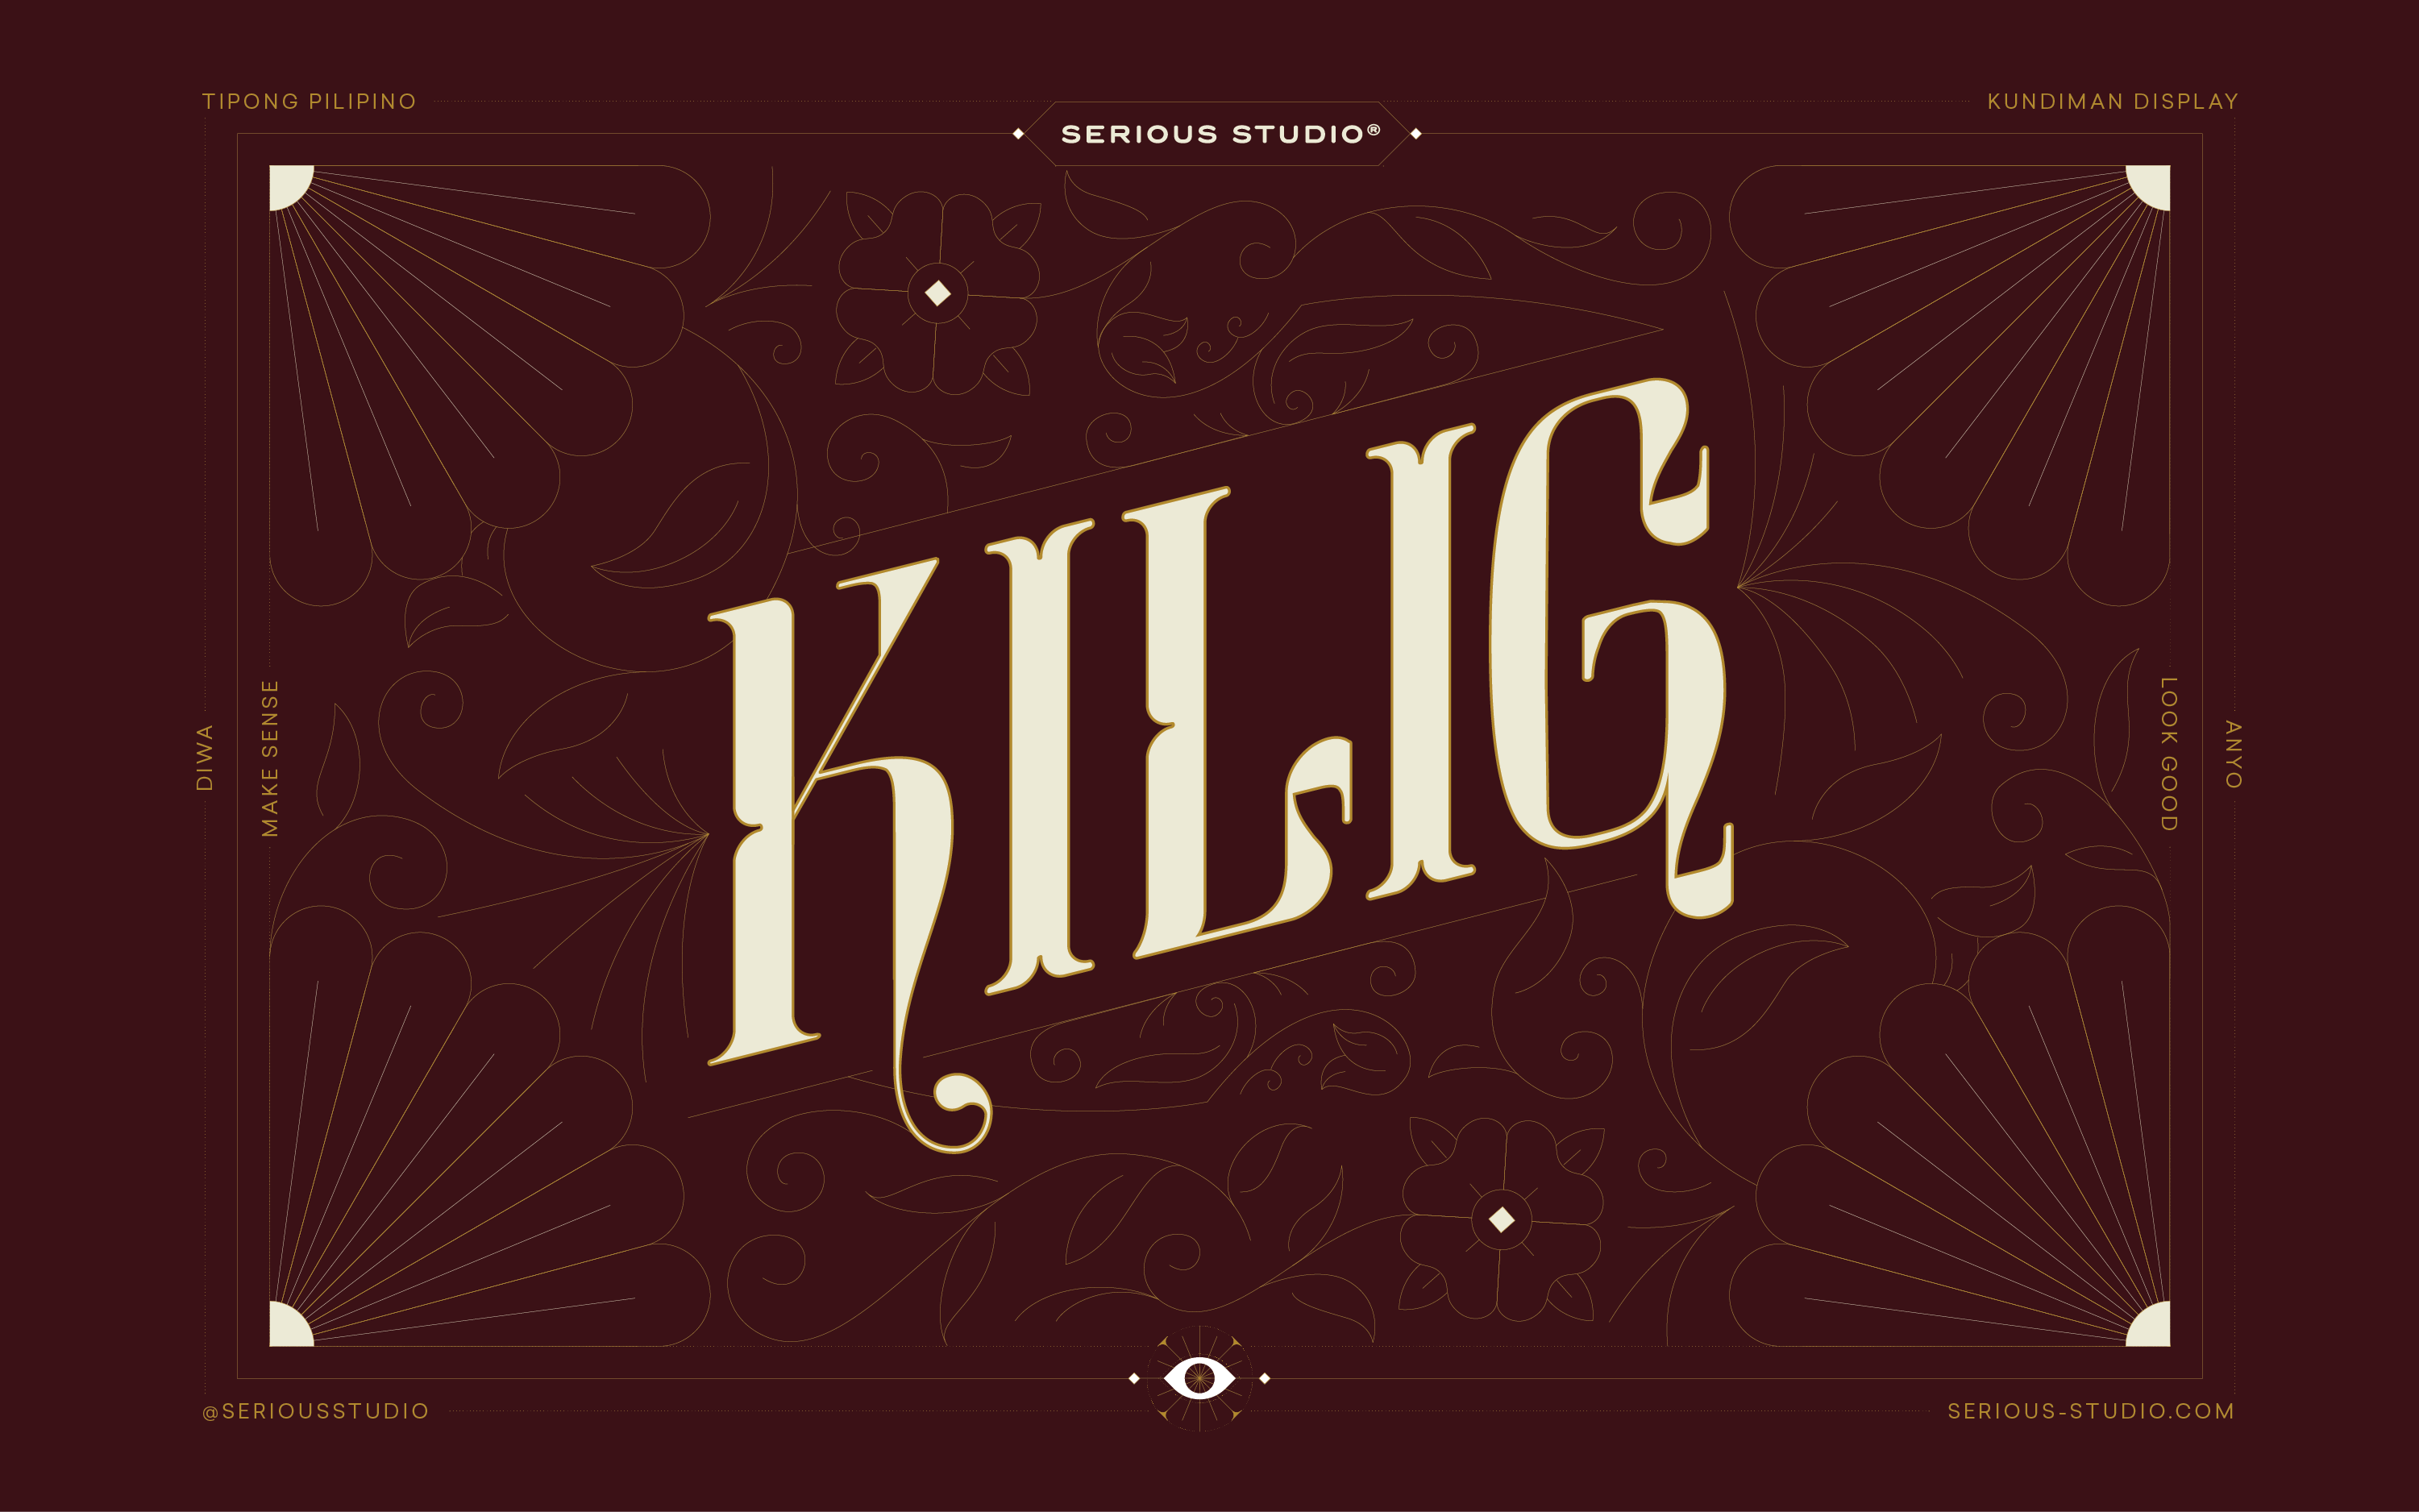 Typography application with floral elements of the custom Filipino typeface Kundiman